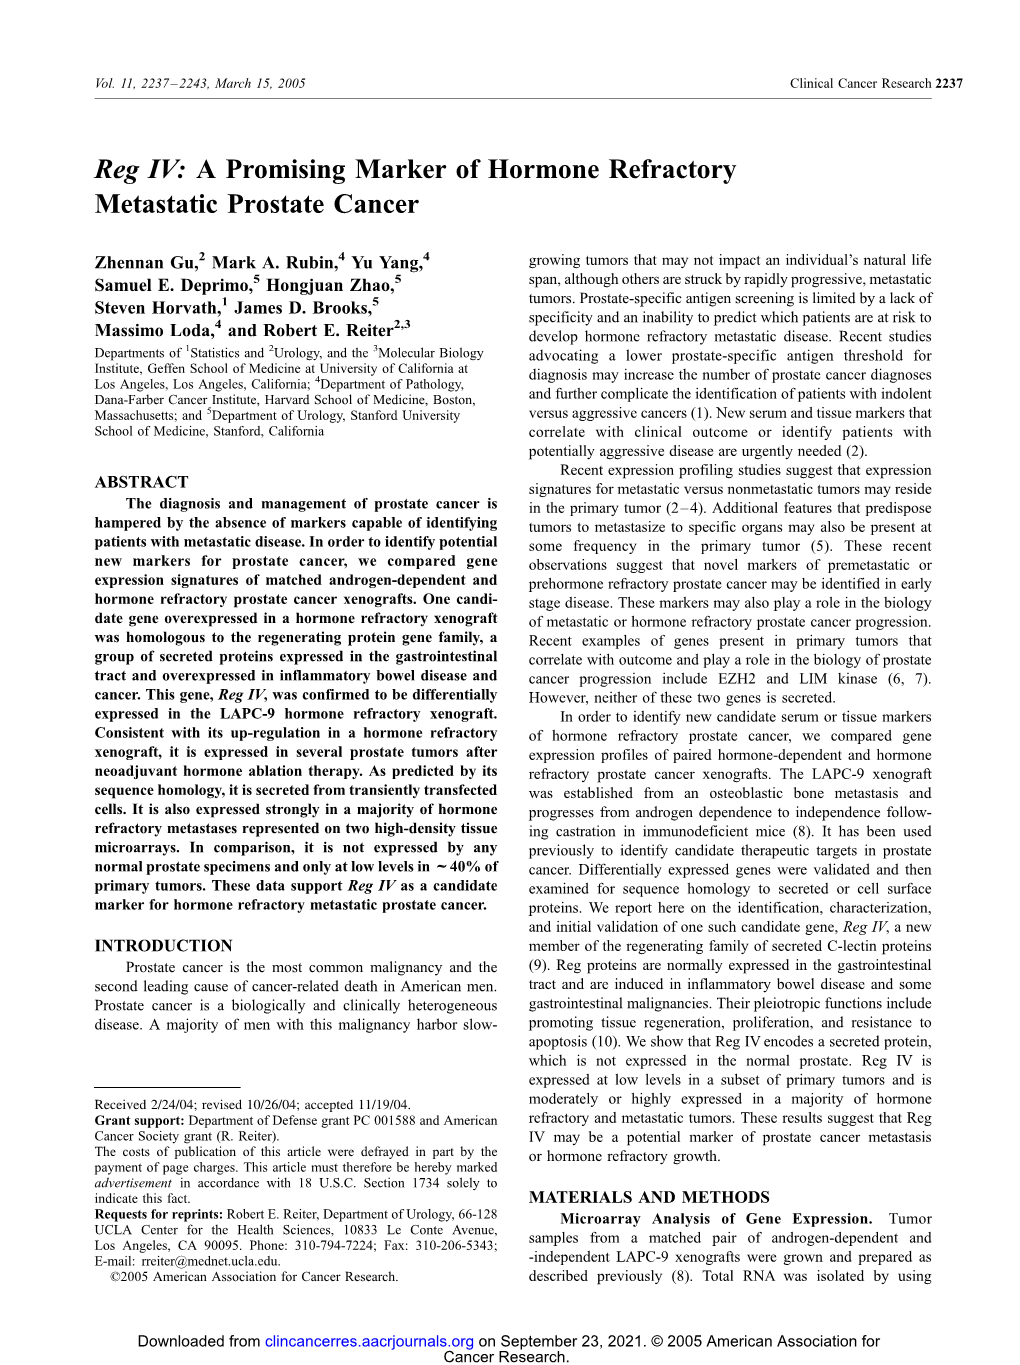 A Promising Marker of Hormone Refractory Metastatic Prostate Cancer